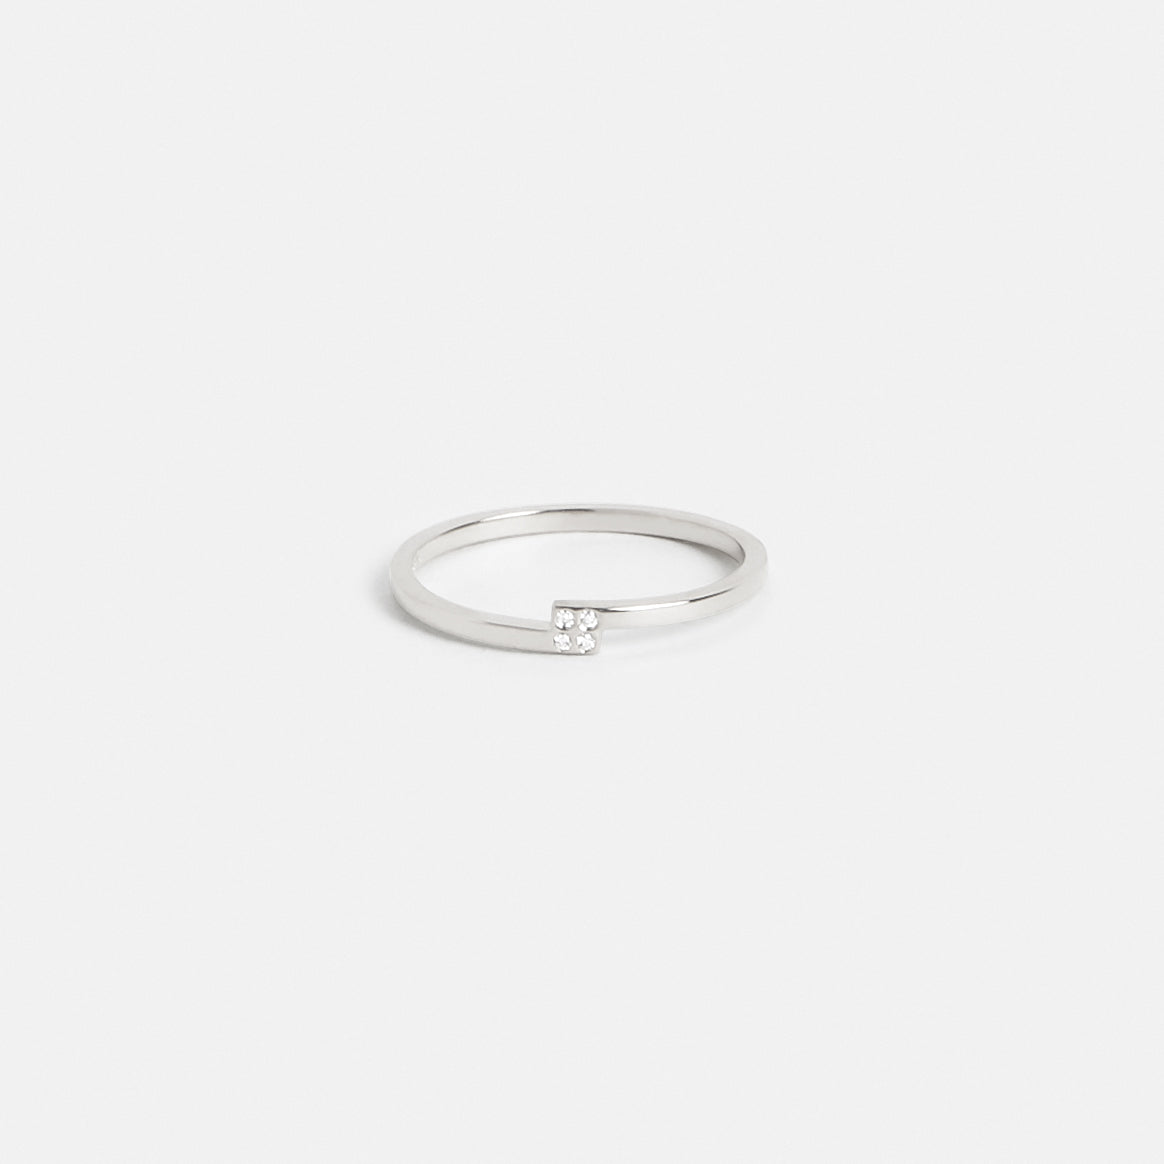 Piva Unique Ring in Sterling Silver set with Whit Diamonds By SHW Fine Jewelry New York City